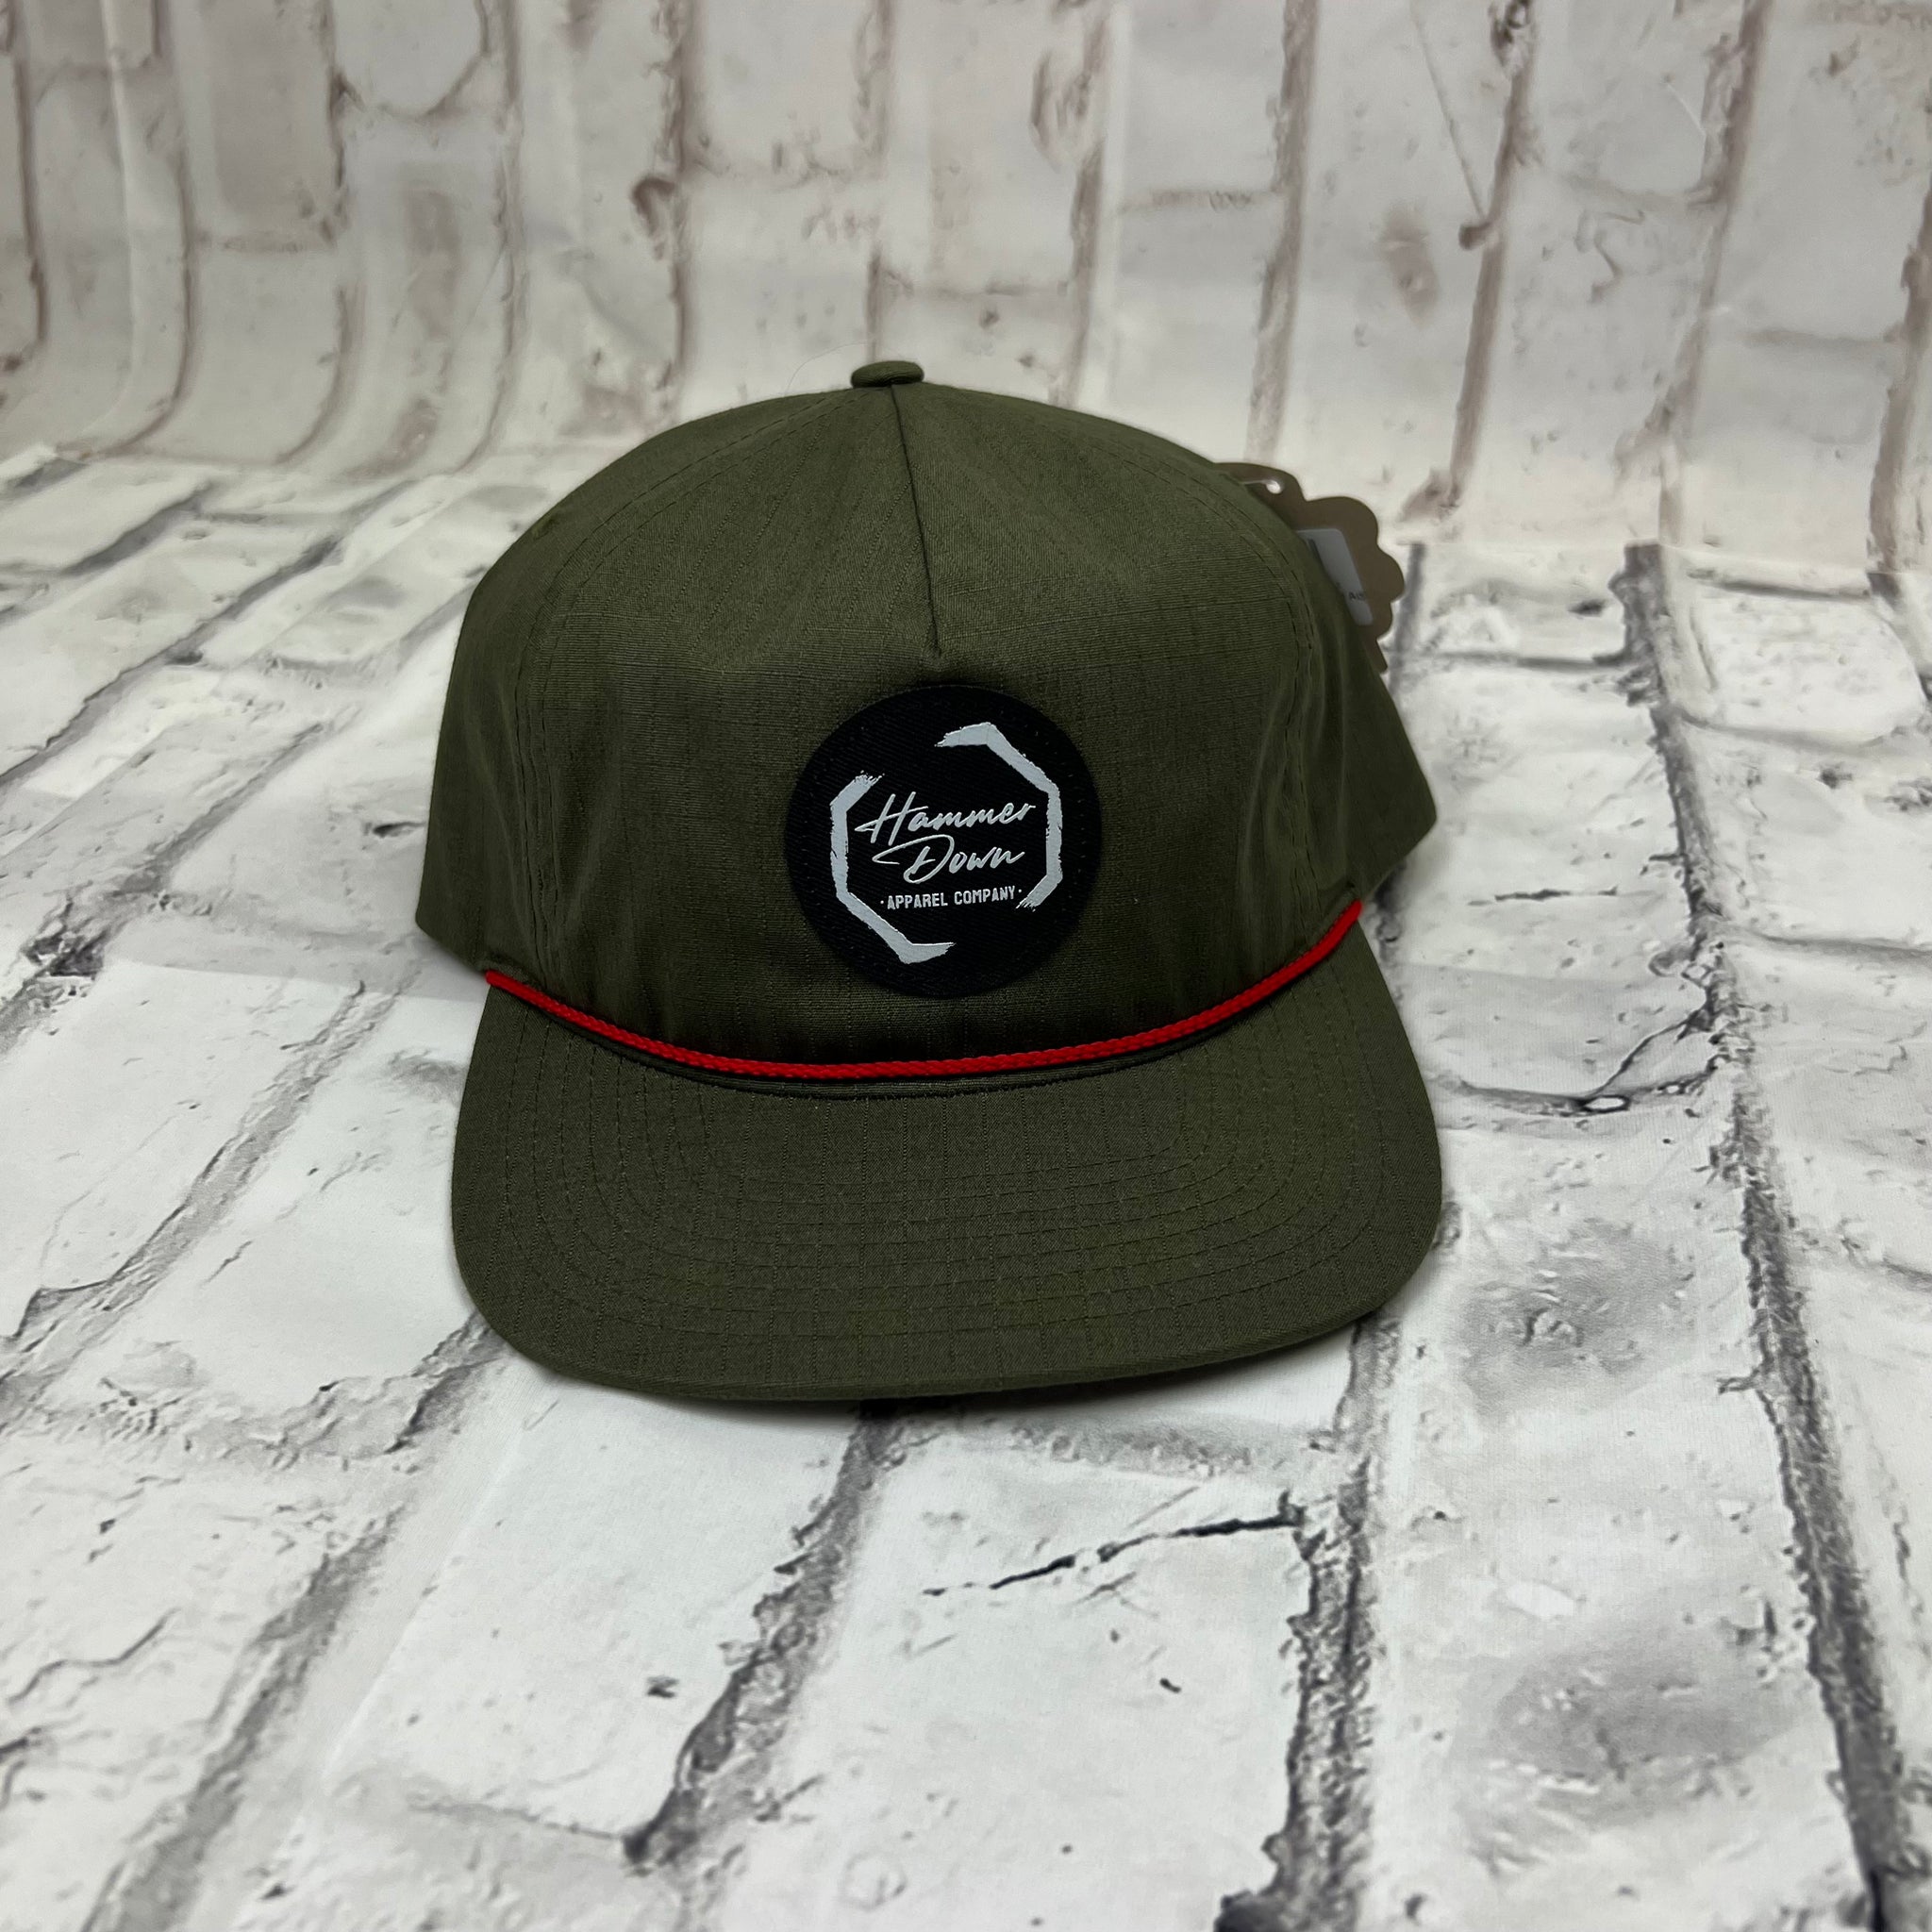 Hammer Down "Paint Octagon" Hat - Moss Green with Red Rope